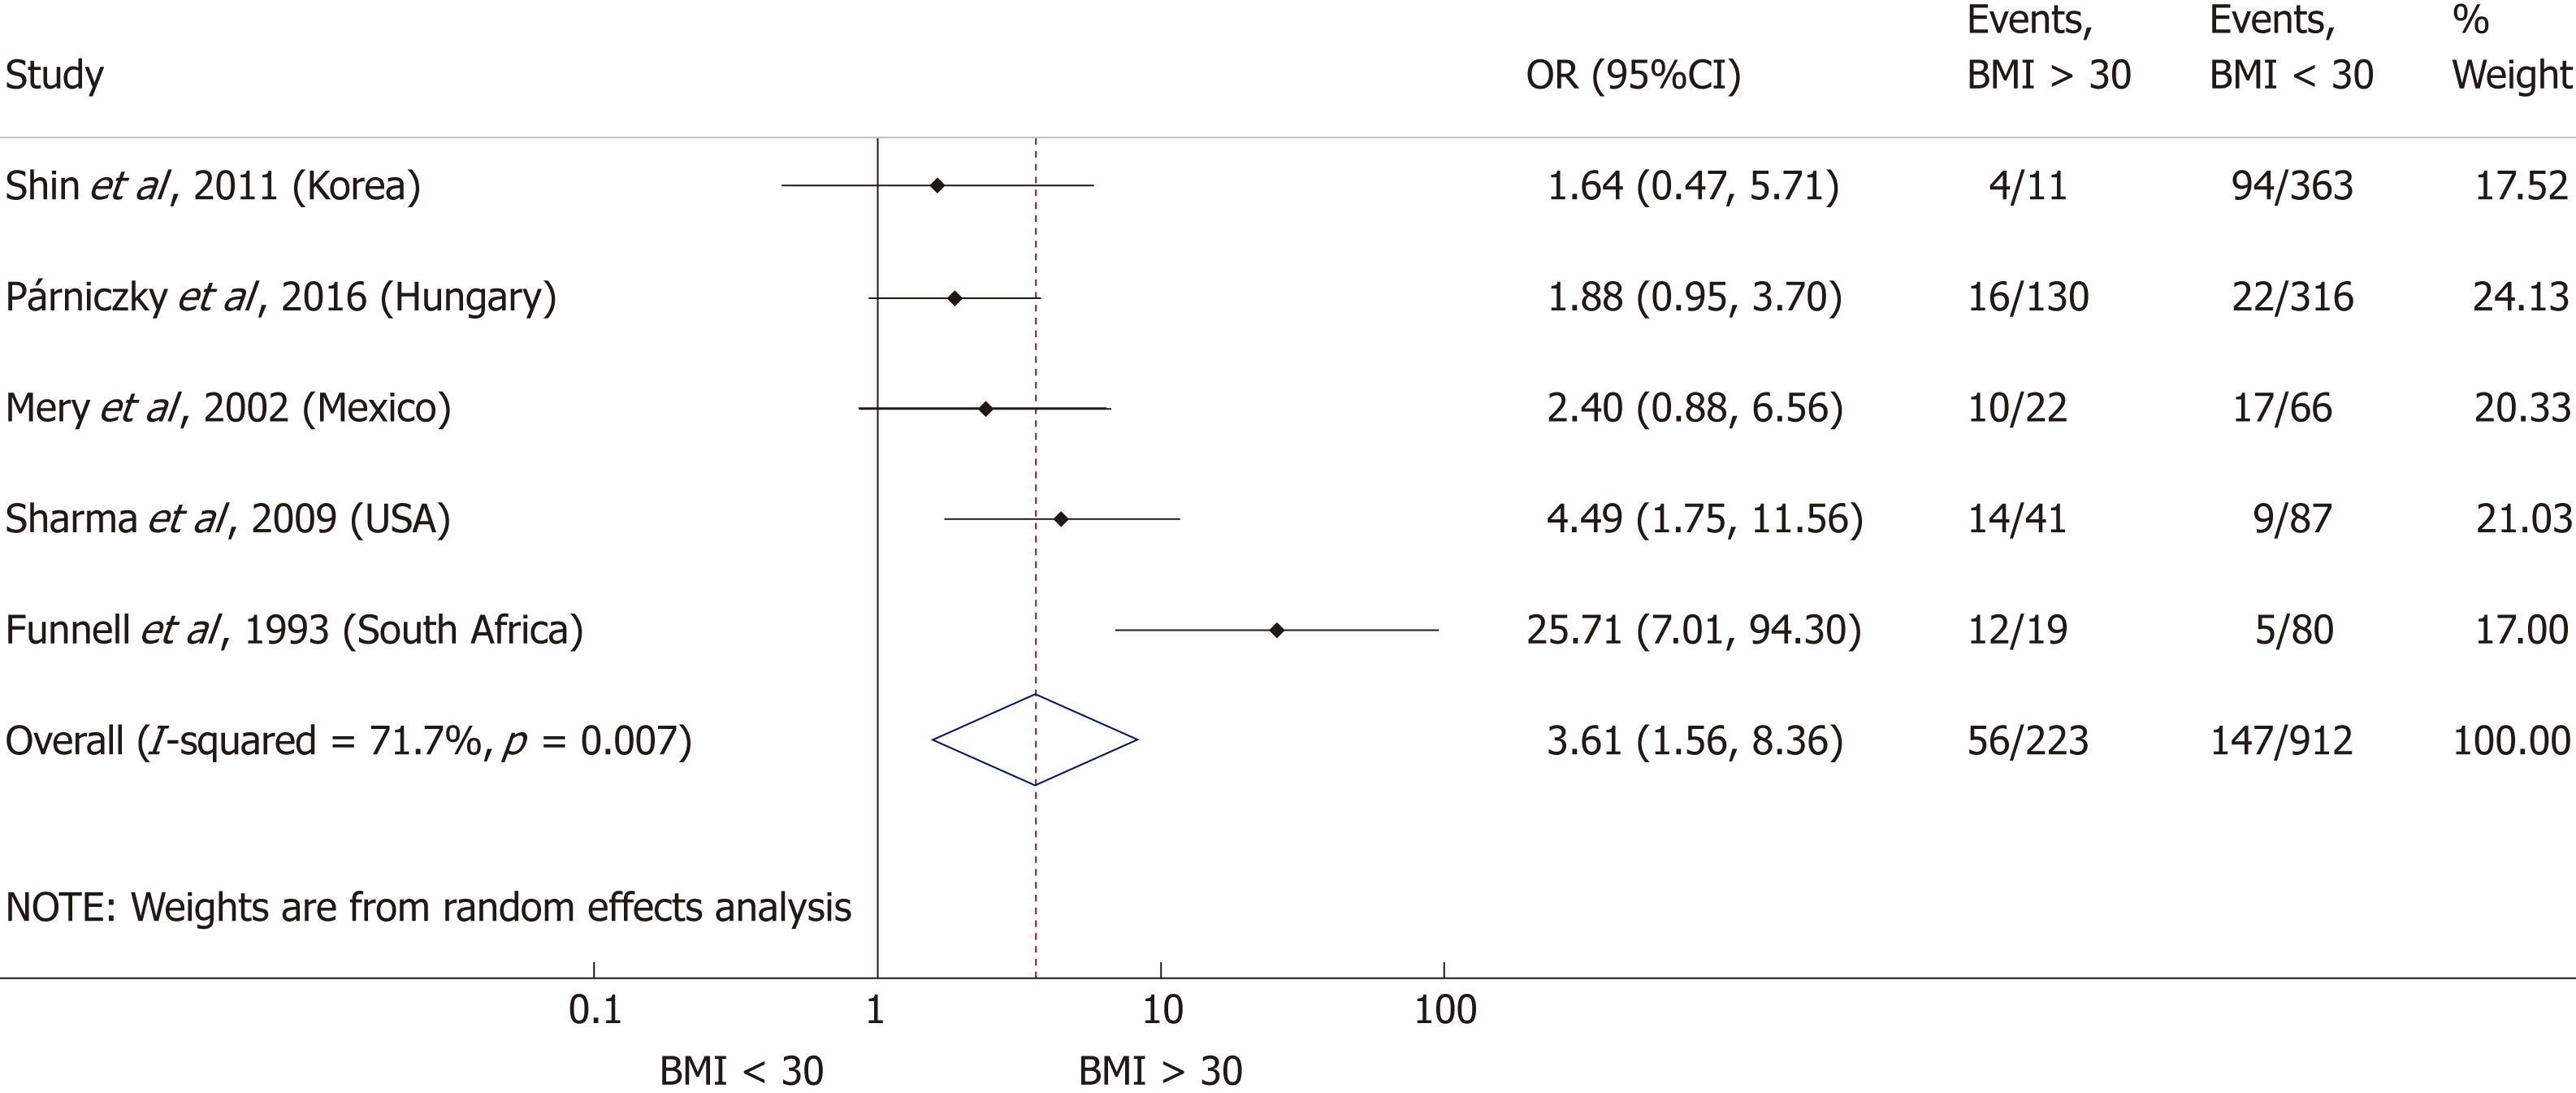 Body Mass Index Correlates With Severity And Mortality In Acute